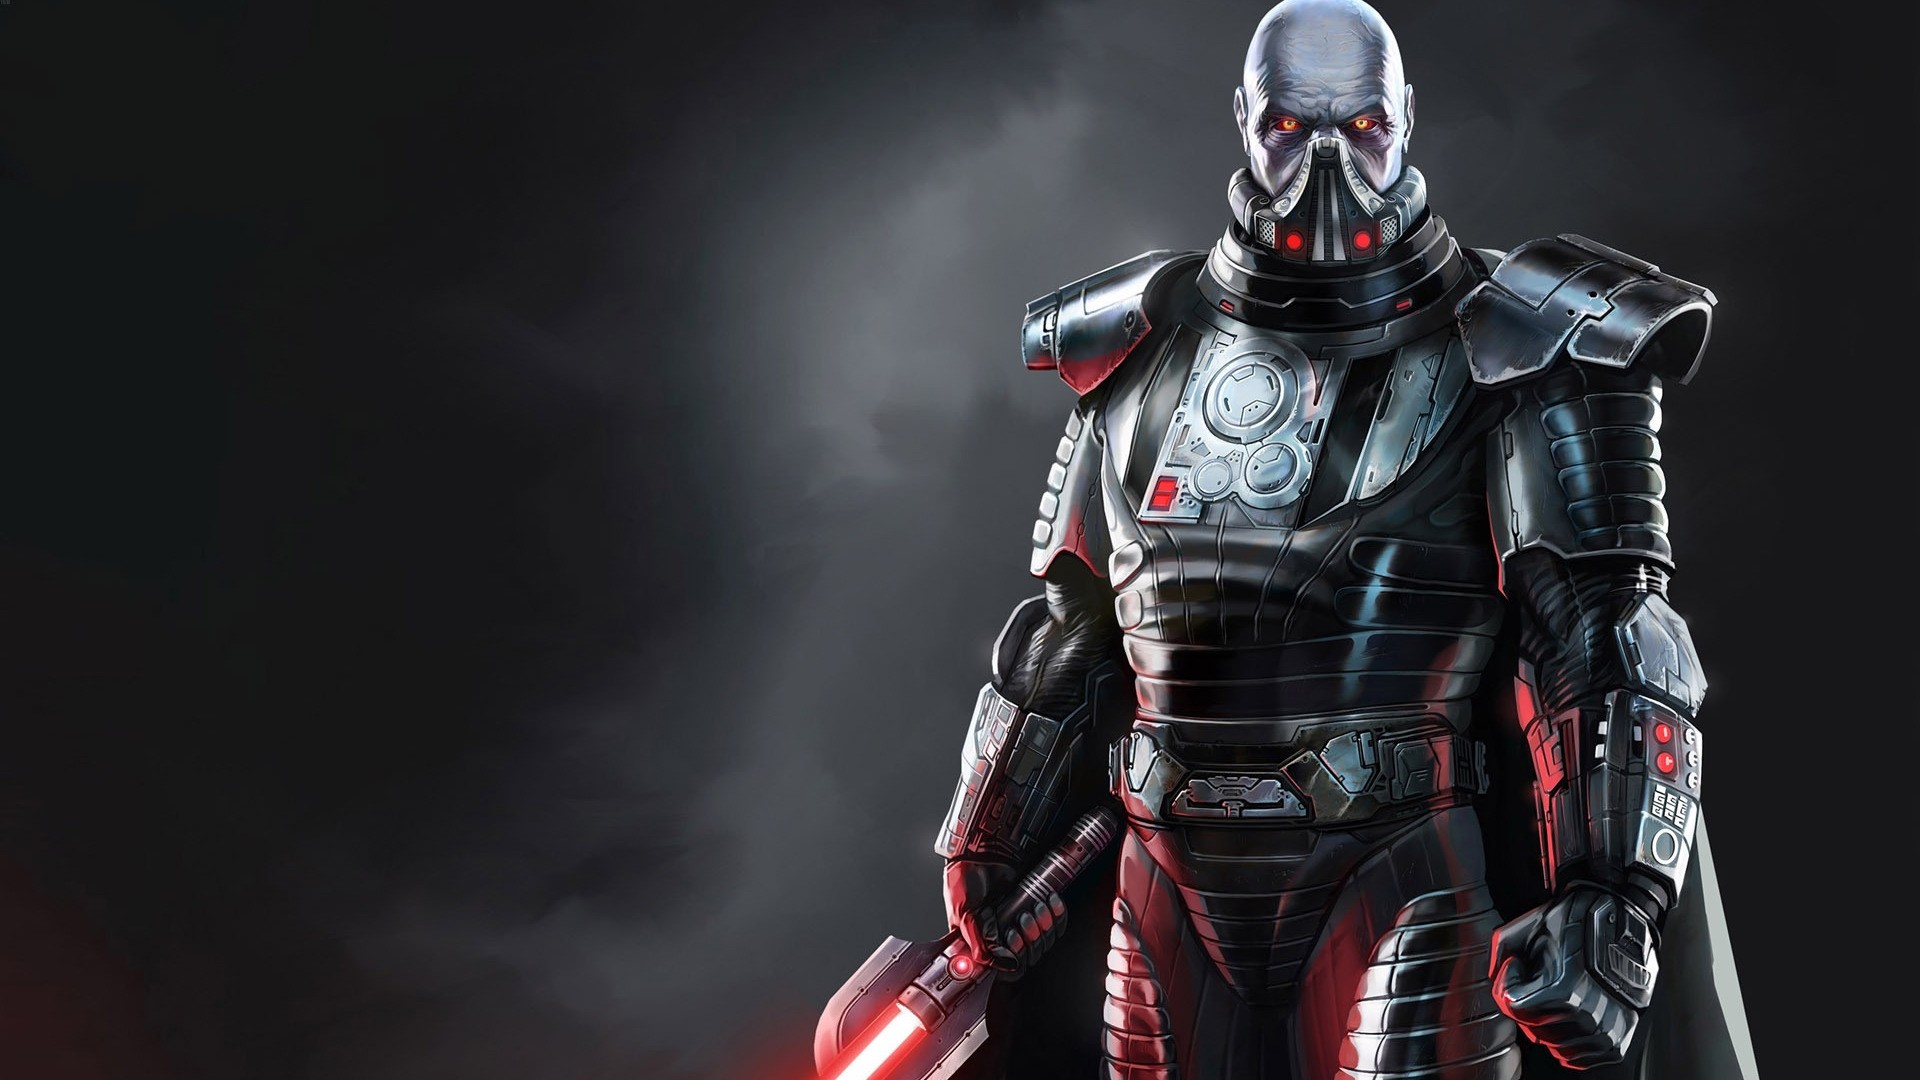 1920x1080 Star Wars Sith Wallpapers High Definition